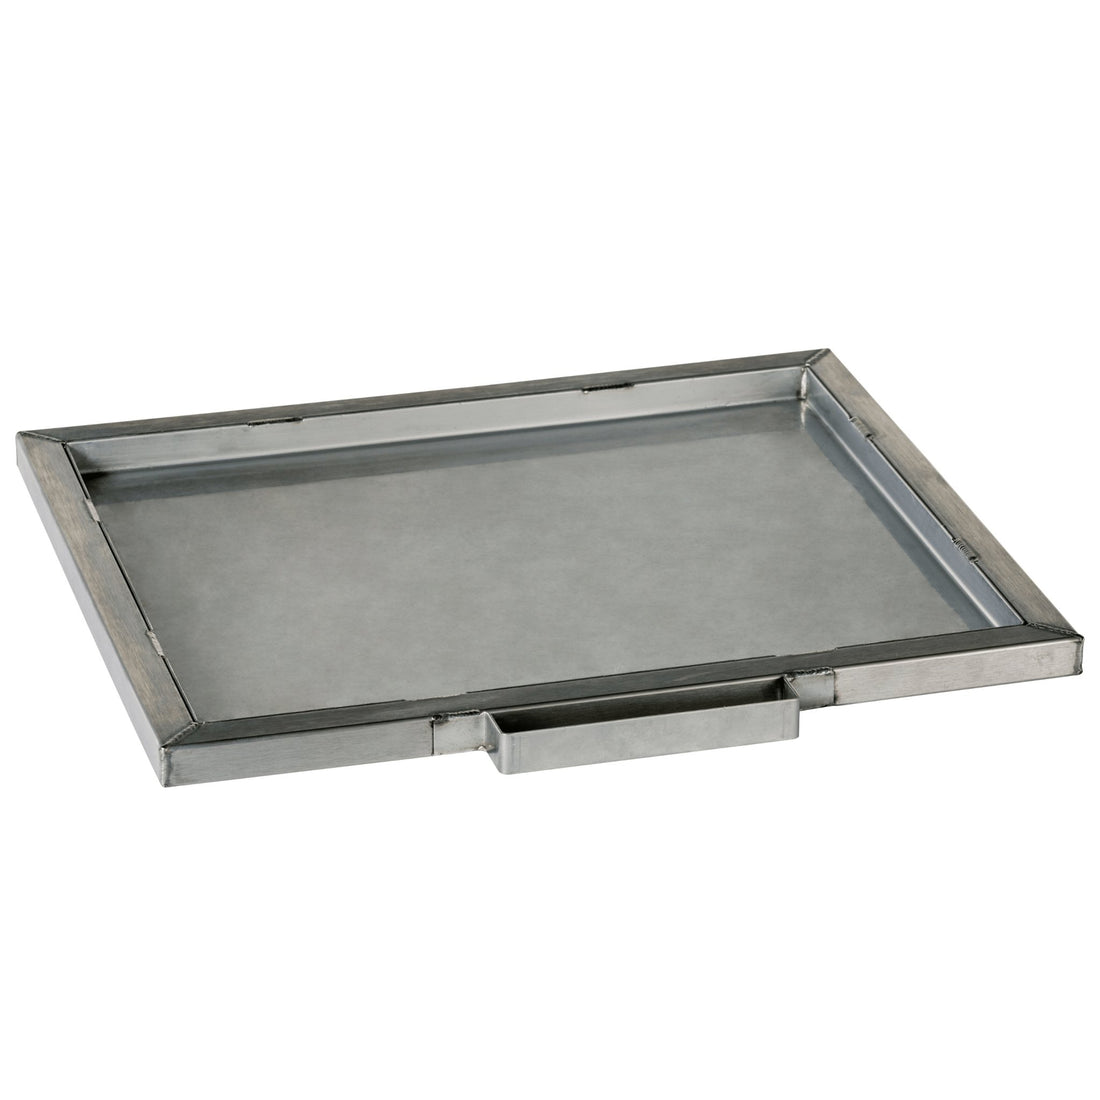 Flat Bed Plancha Rack for frying, griddling, and roasting.  Offers an extra level and slots into the oven.  Stainless steel.